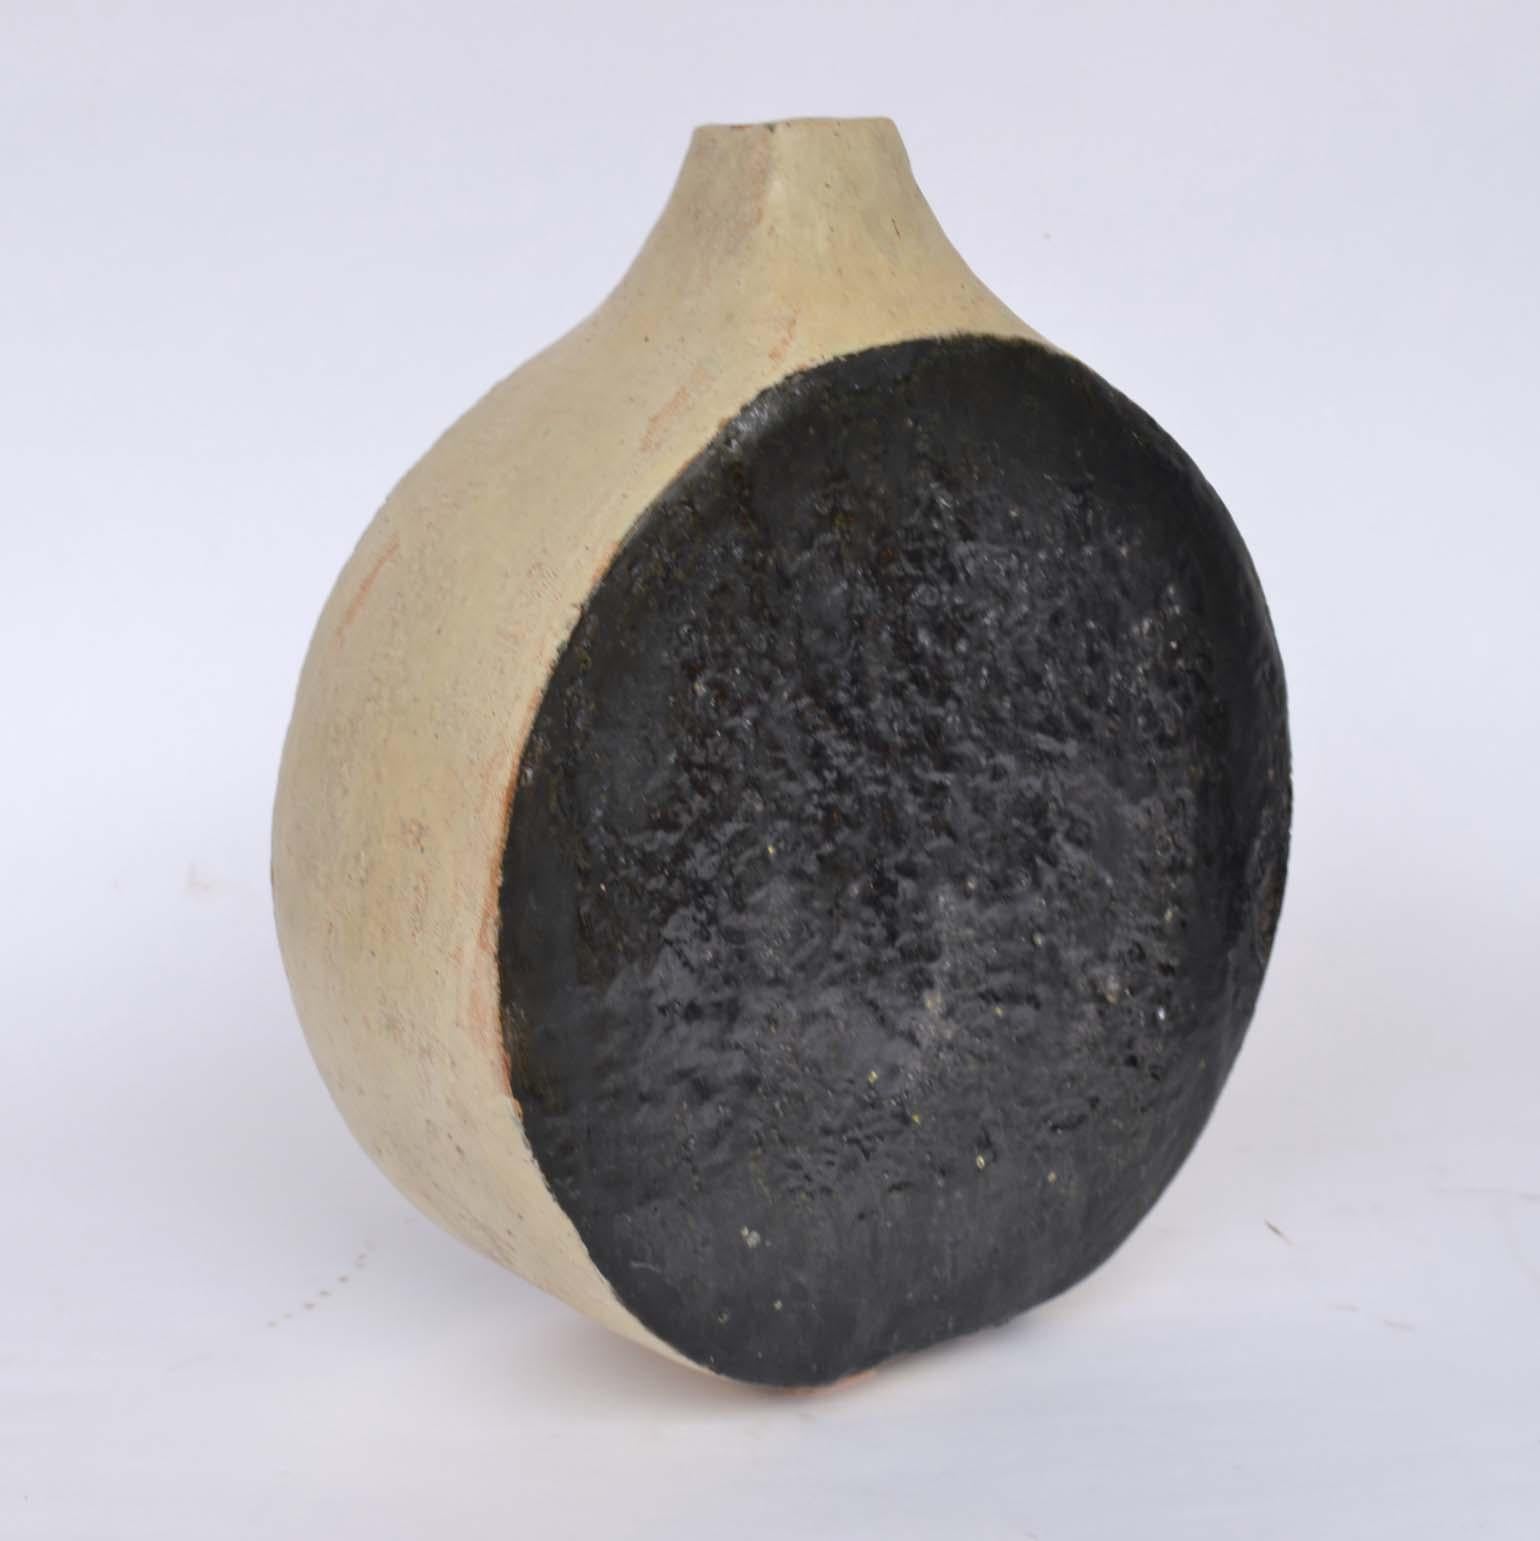 1960s hand formed studio pottery by the artist Krystyna Czelny. B 1923 in Poland and living in the UK. 
She is also known for her busts and portraits.

Tall cylinder vase black: Height 43 cm, W 11 cm, £750
Round and flat black and white vase: H